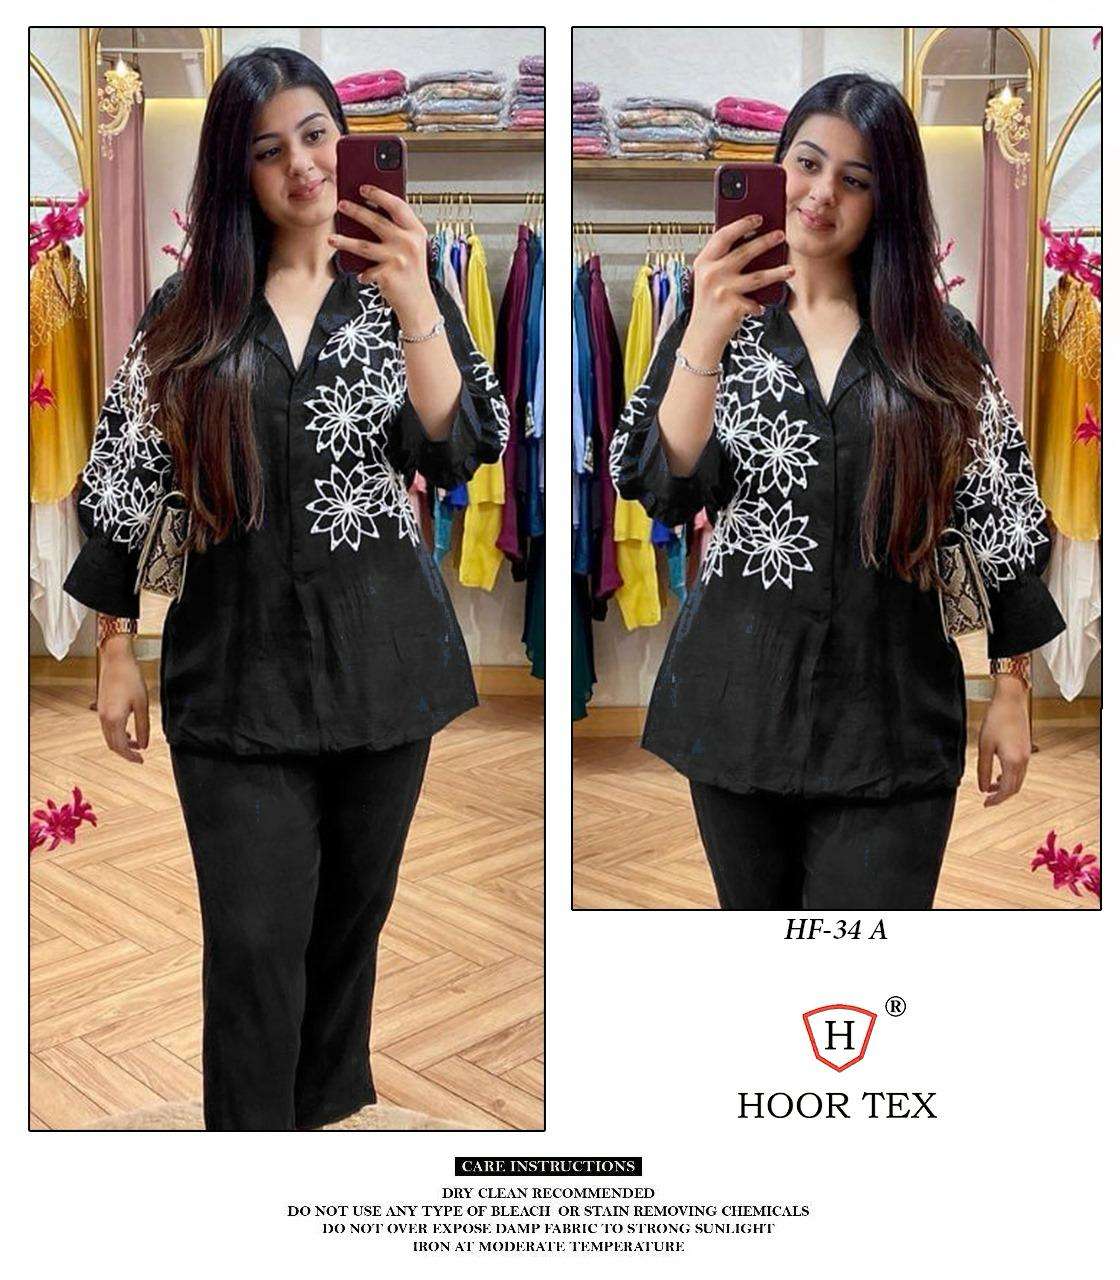 cord set hoor tex presents new catalogue in pakistani full stitched hf 34 a to c top imported silk bottom imported silk stylish cord set 